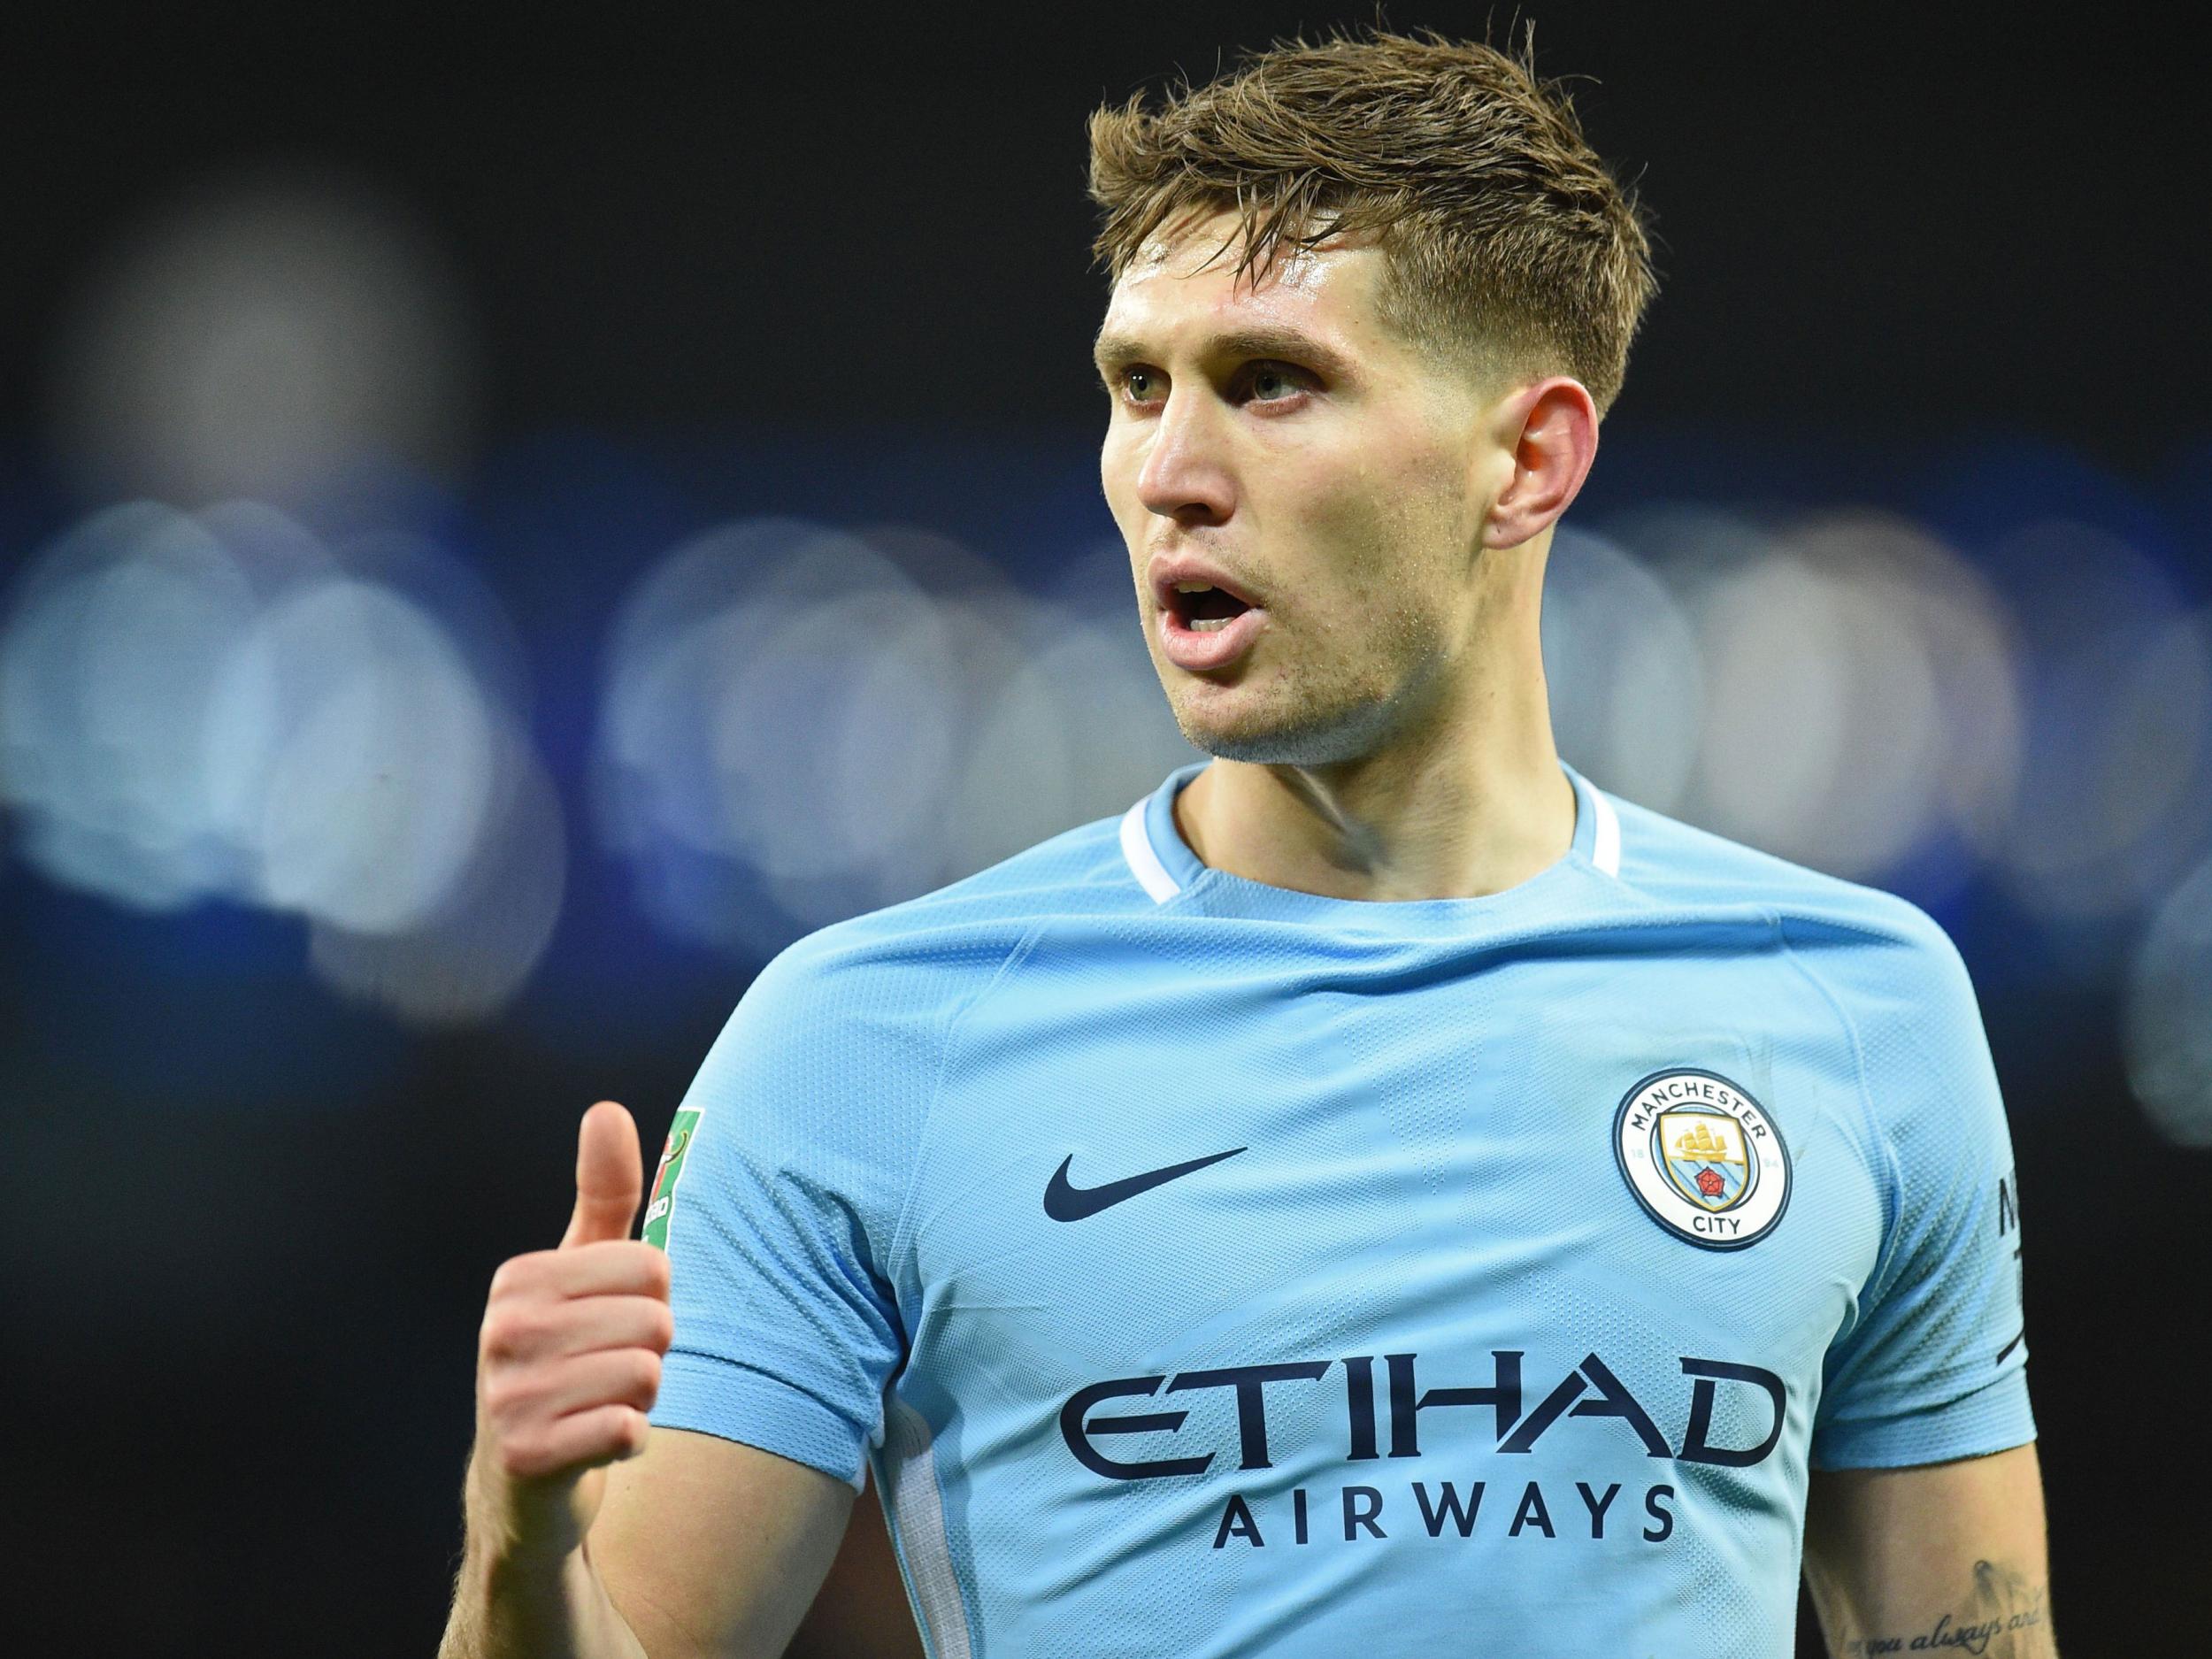 John Stones believes Manchester City may come under less pressure without their unbeaten record